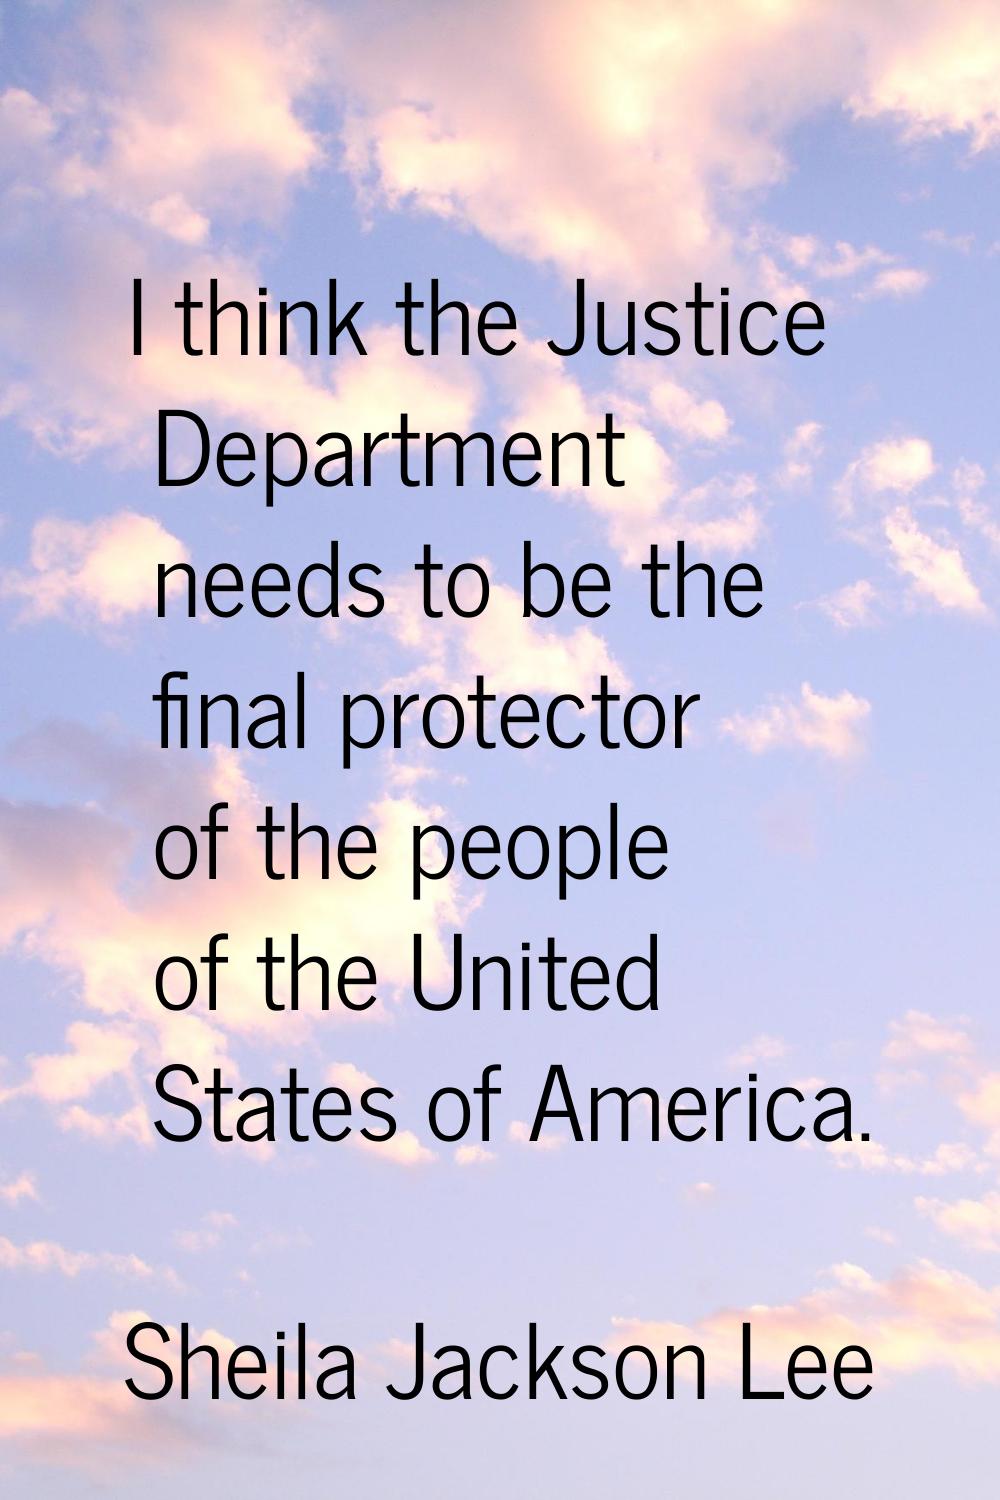 I think the Justice Department needs to be the final protector of the people of the United States o